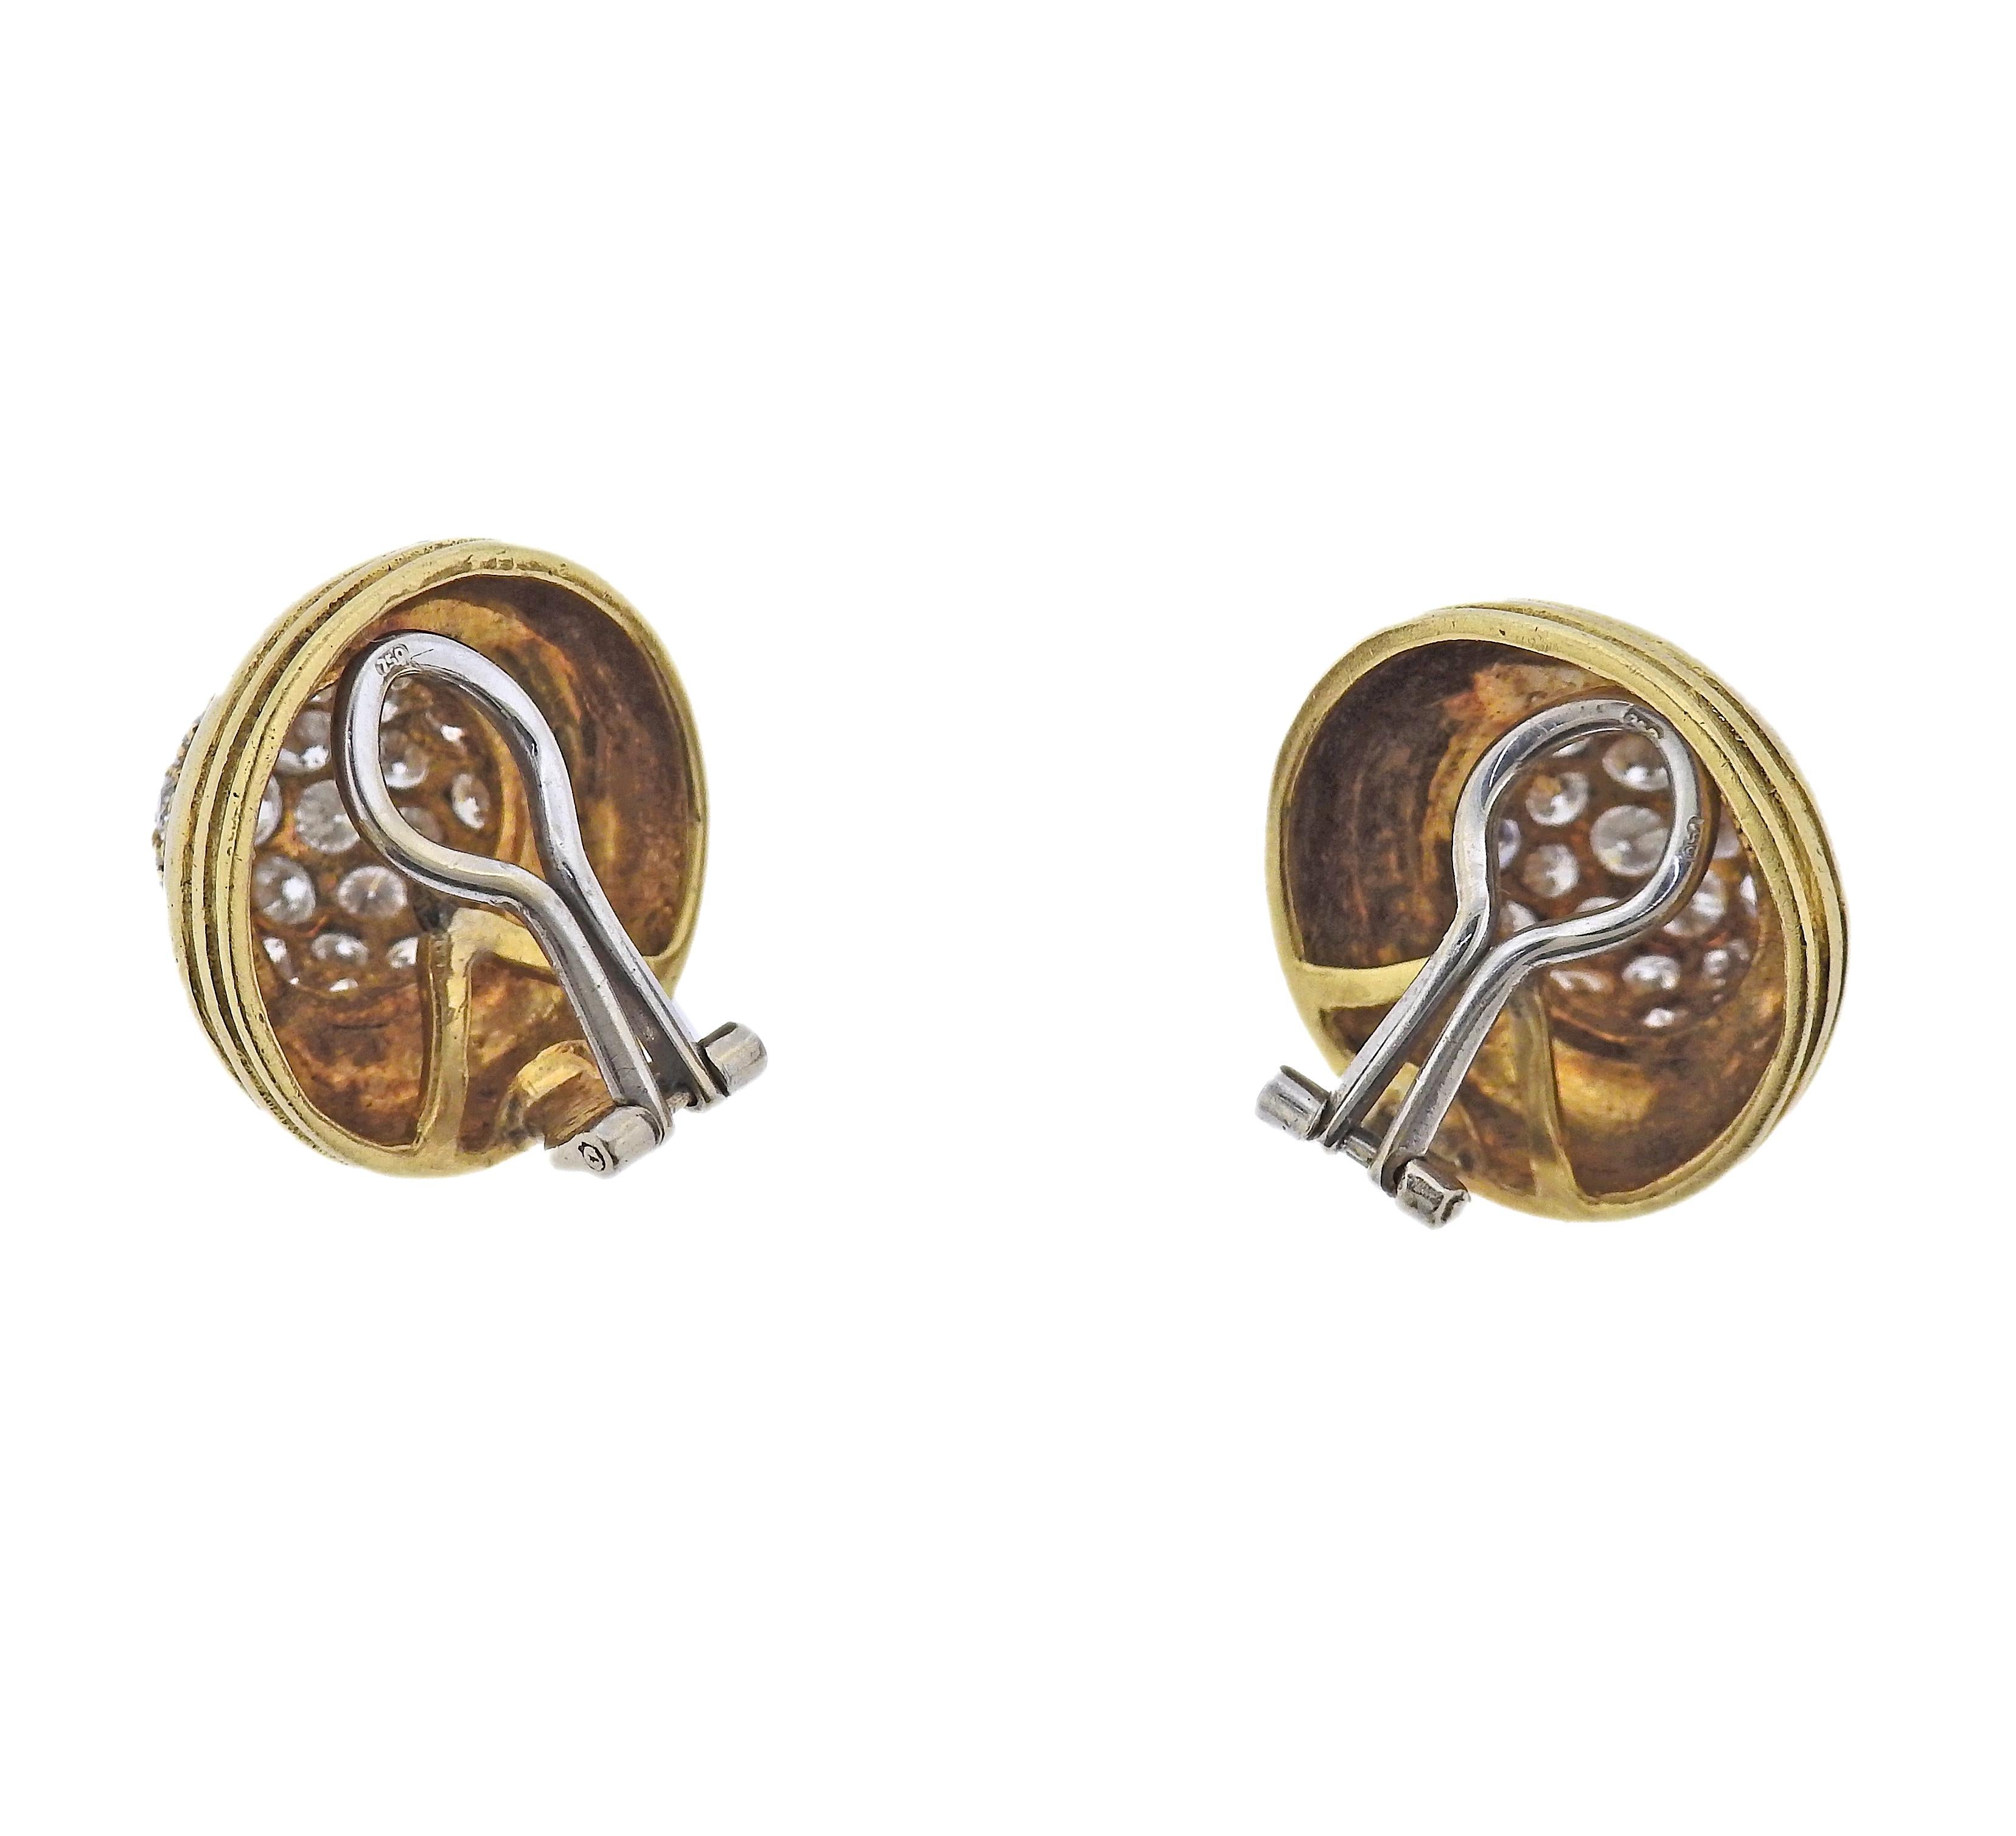 Pair of 18k gold button earrings, set with approx. 1.20ctw in H-I/Si diamonds. Earrings measure 19mm in diameter. Marked 18k. Weight - 13.4 grams.